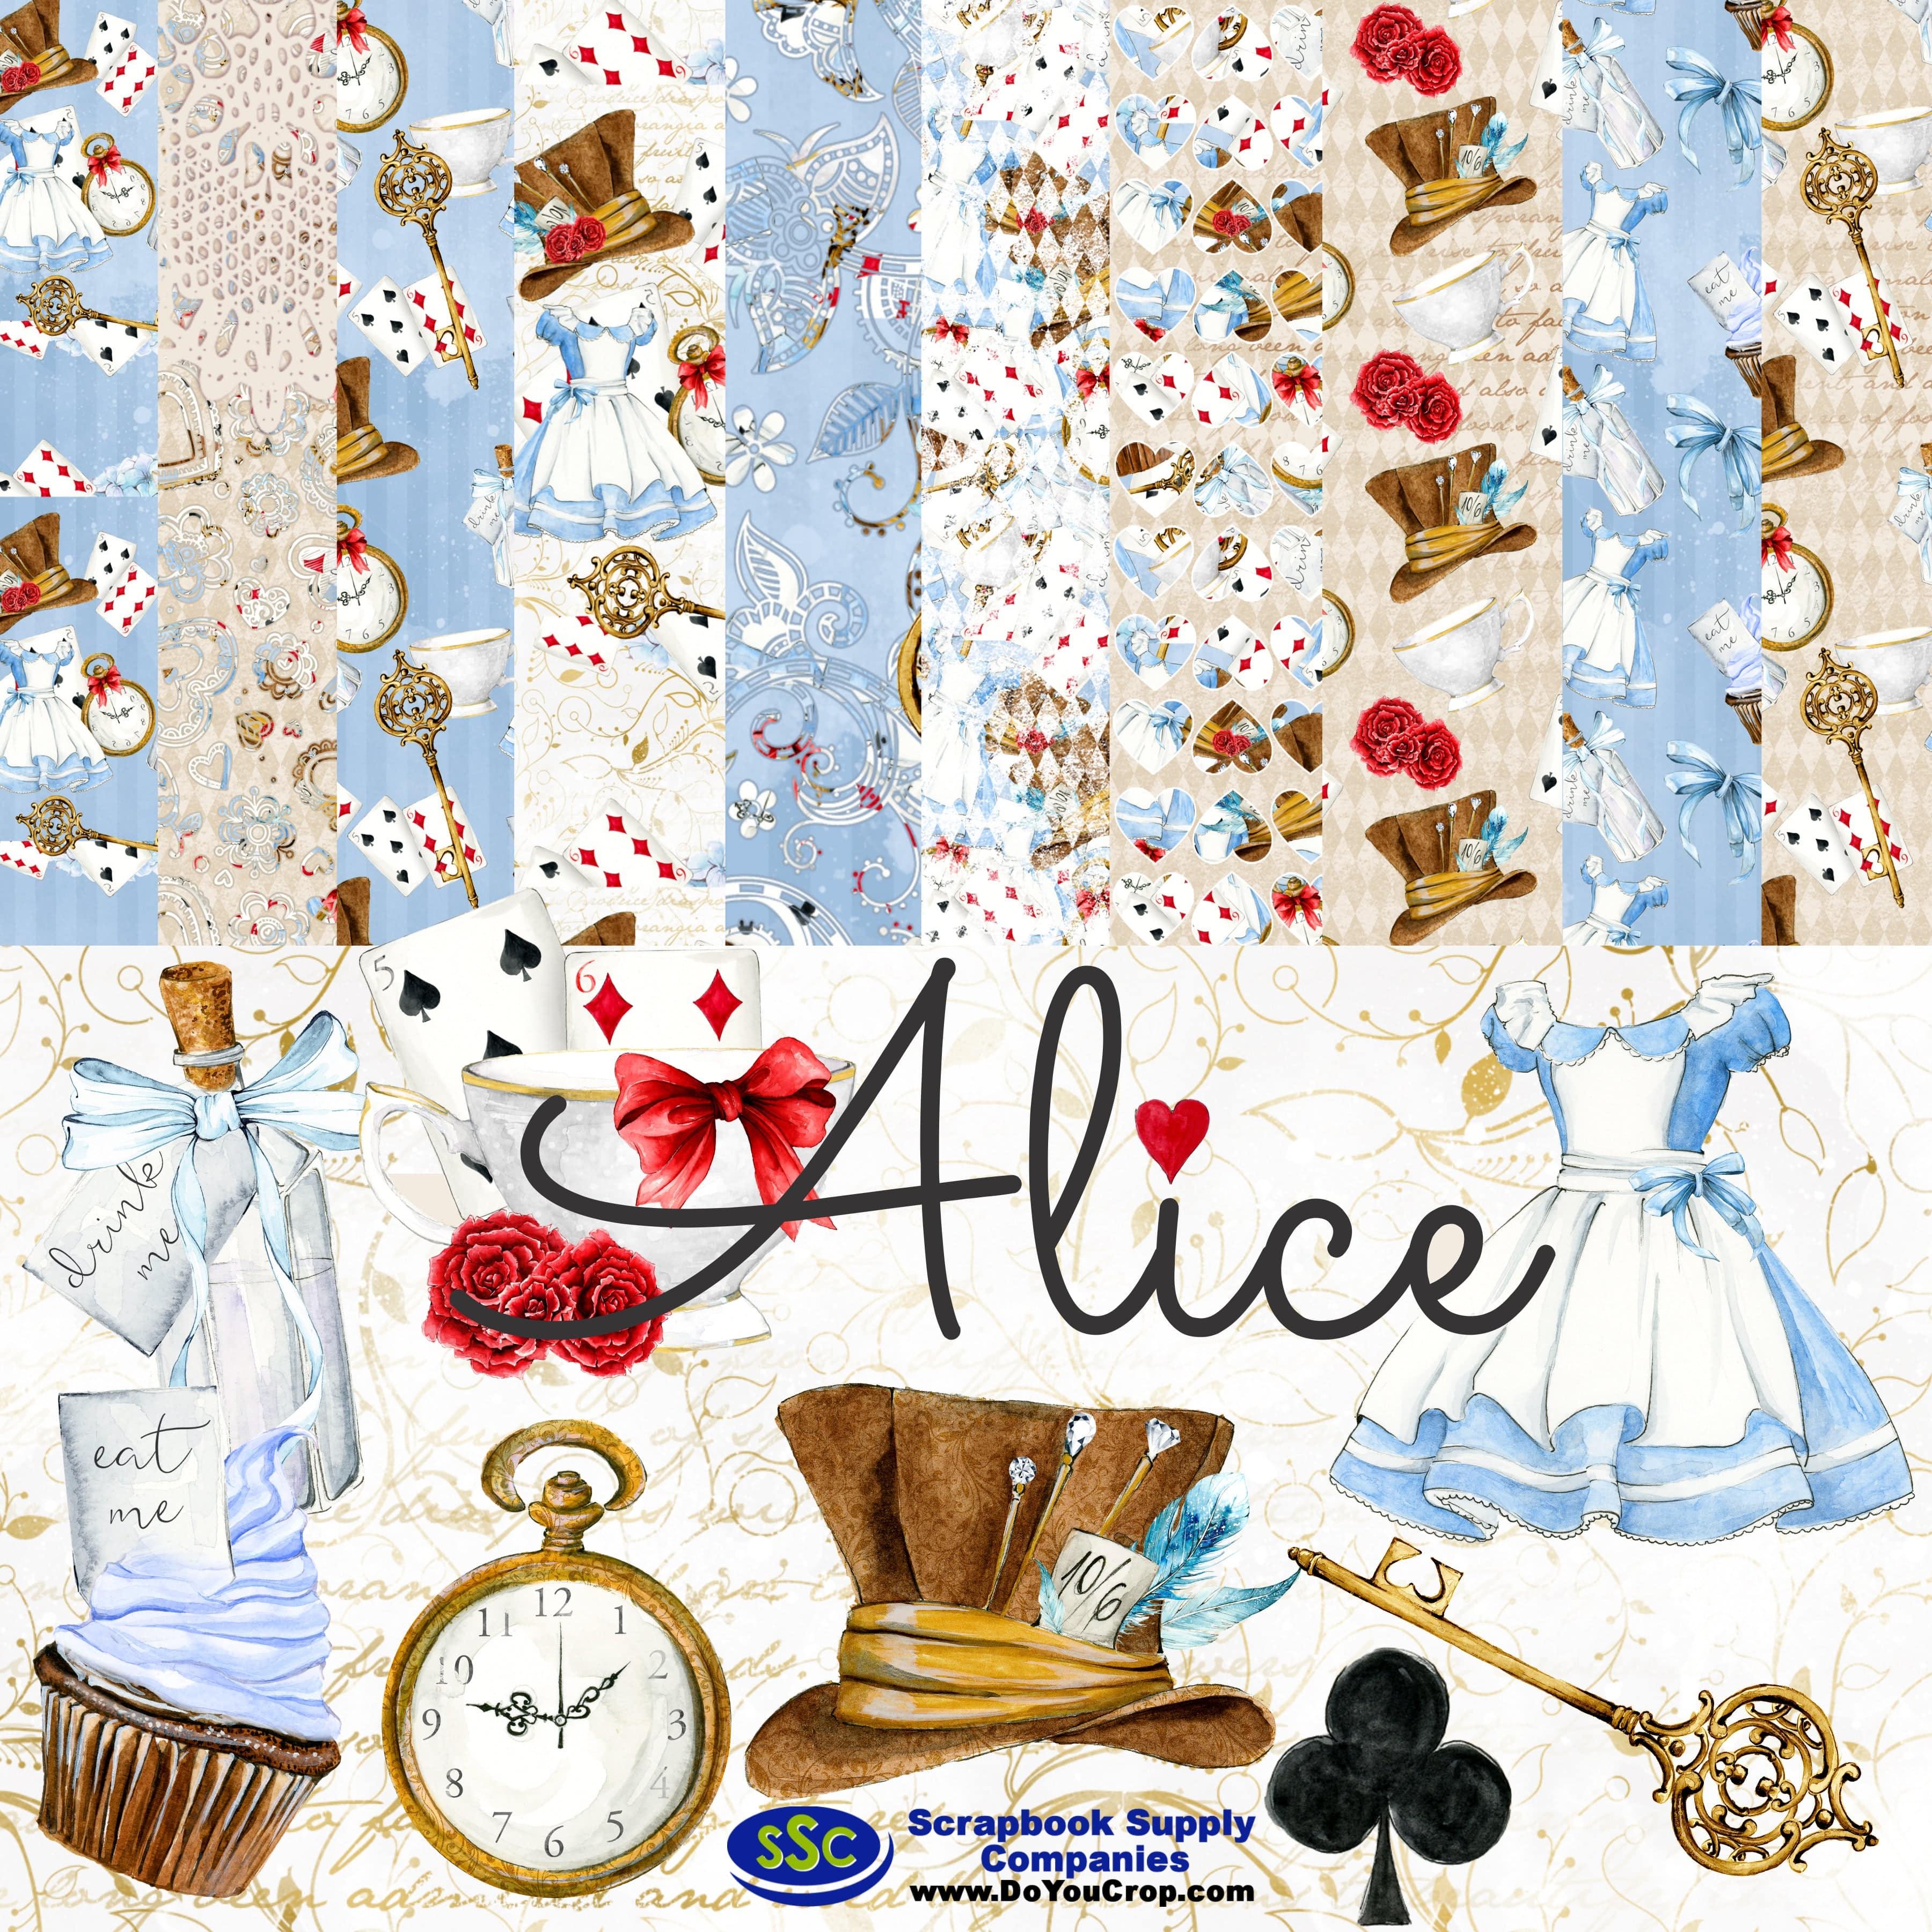 Alice in Wonderland Digital Paper Scrapbooking - Party and Craft